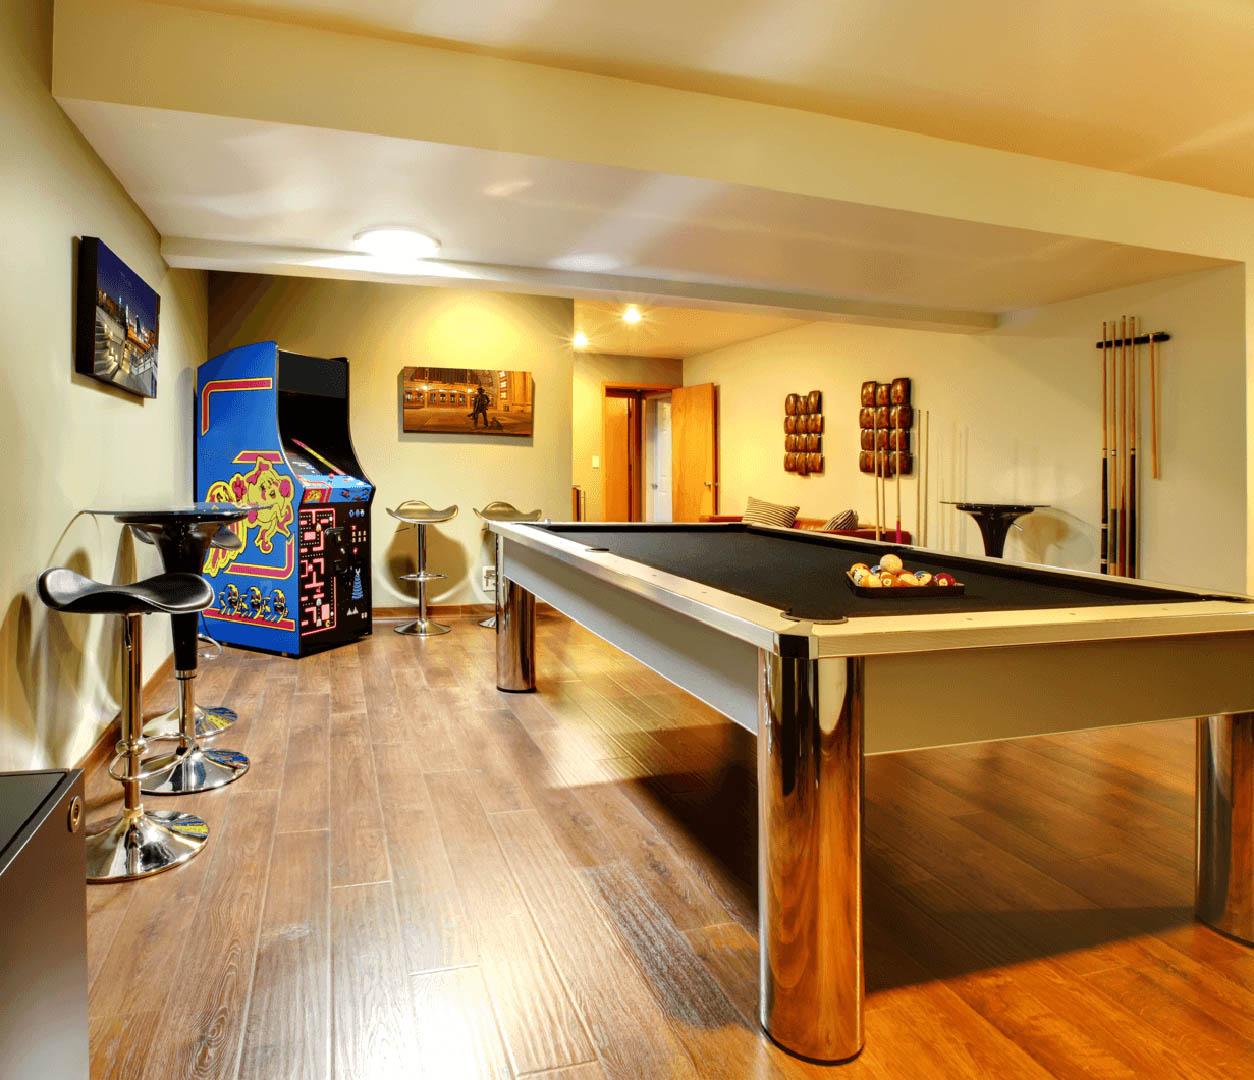 What You Need to Know About Finishing Your Basement Party Room Image